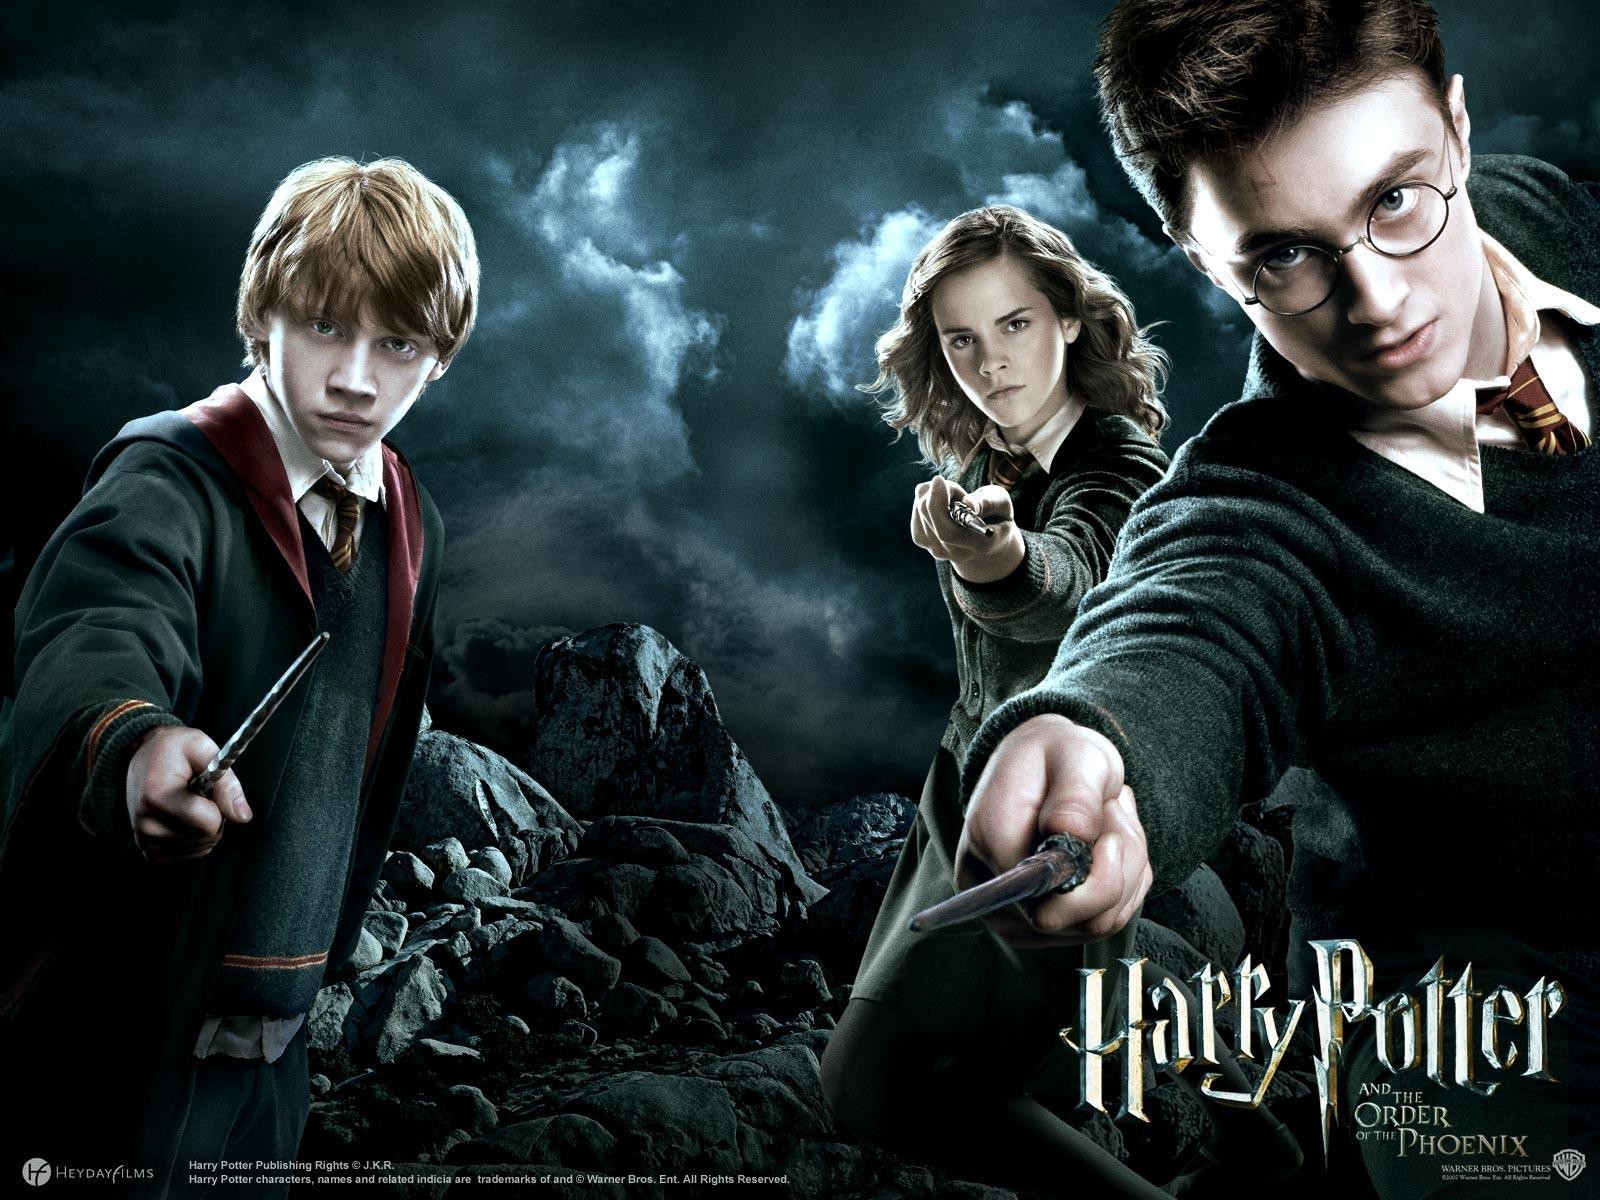 Harry Potter Movie Review – THE ECHO